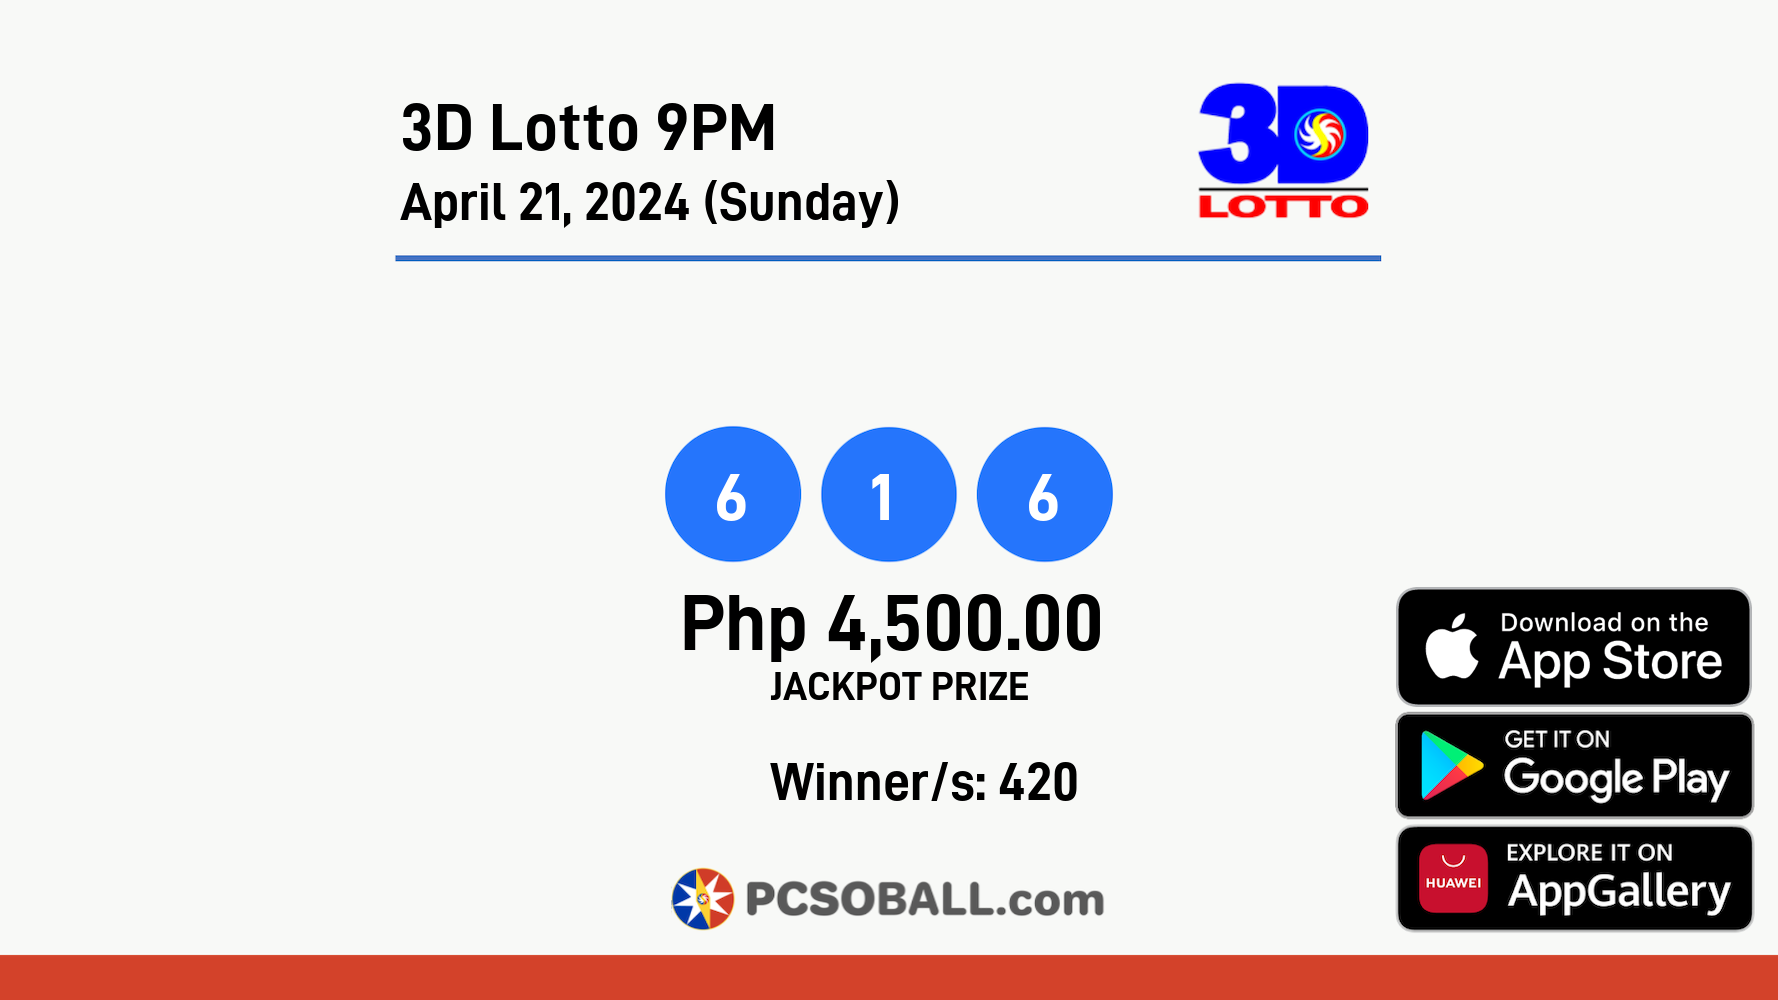 3D Lotto 9PM April 21, 2024 (Sunday) Result